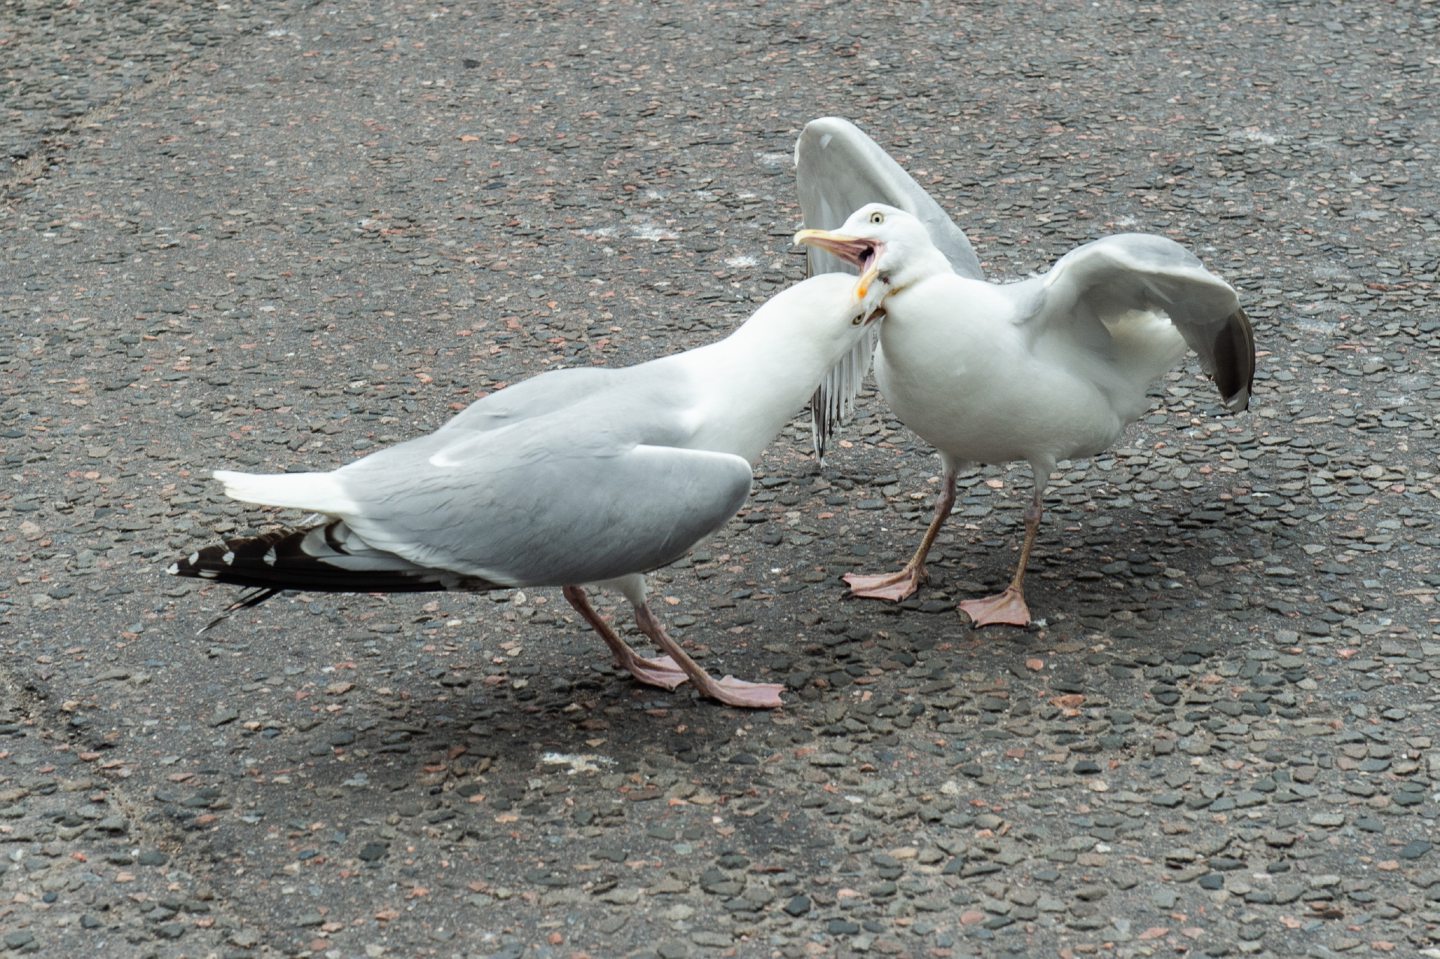 Seagulls fighting in the street